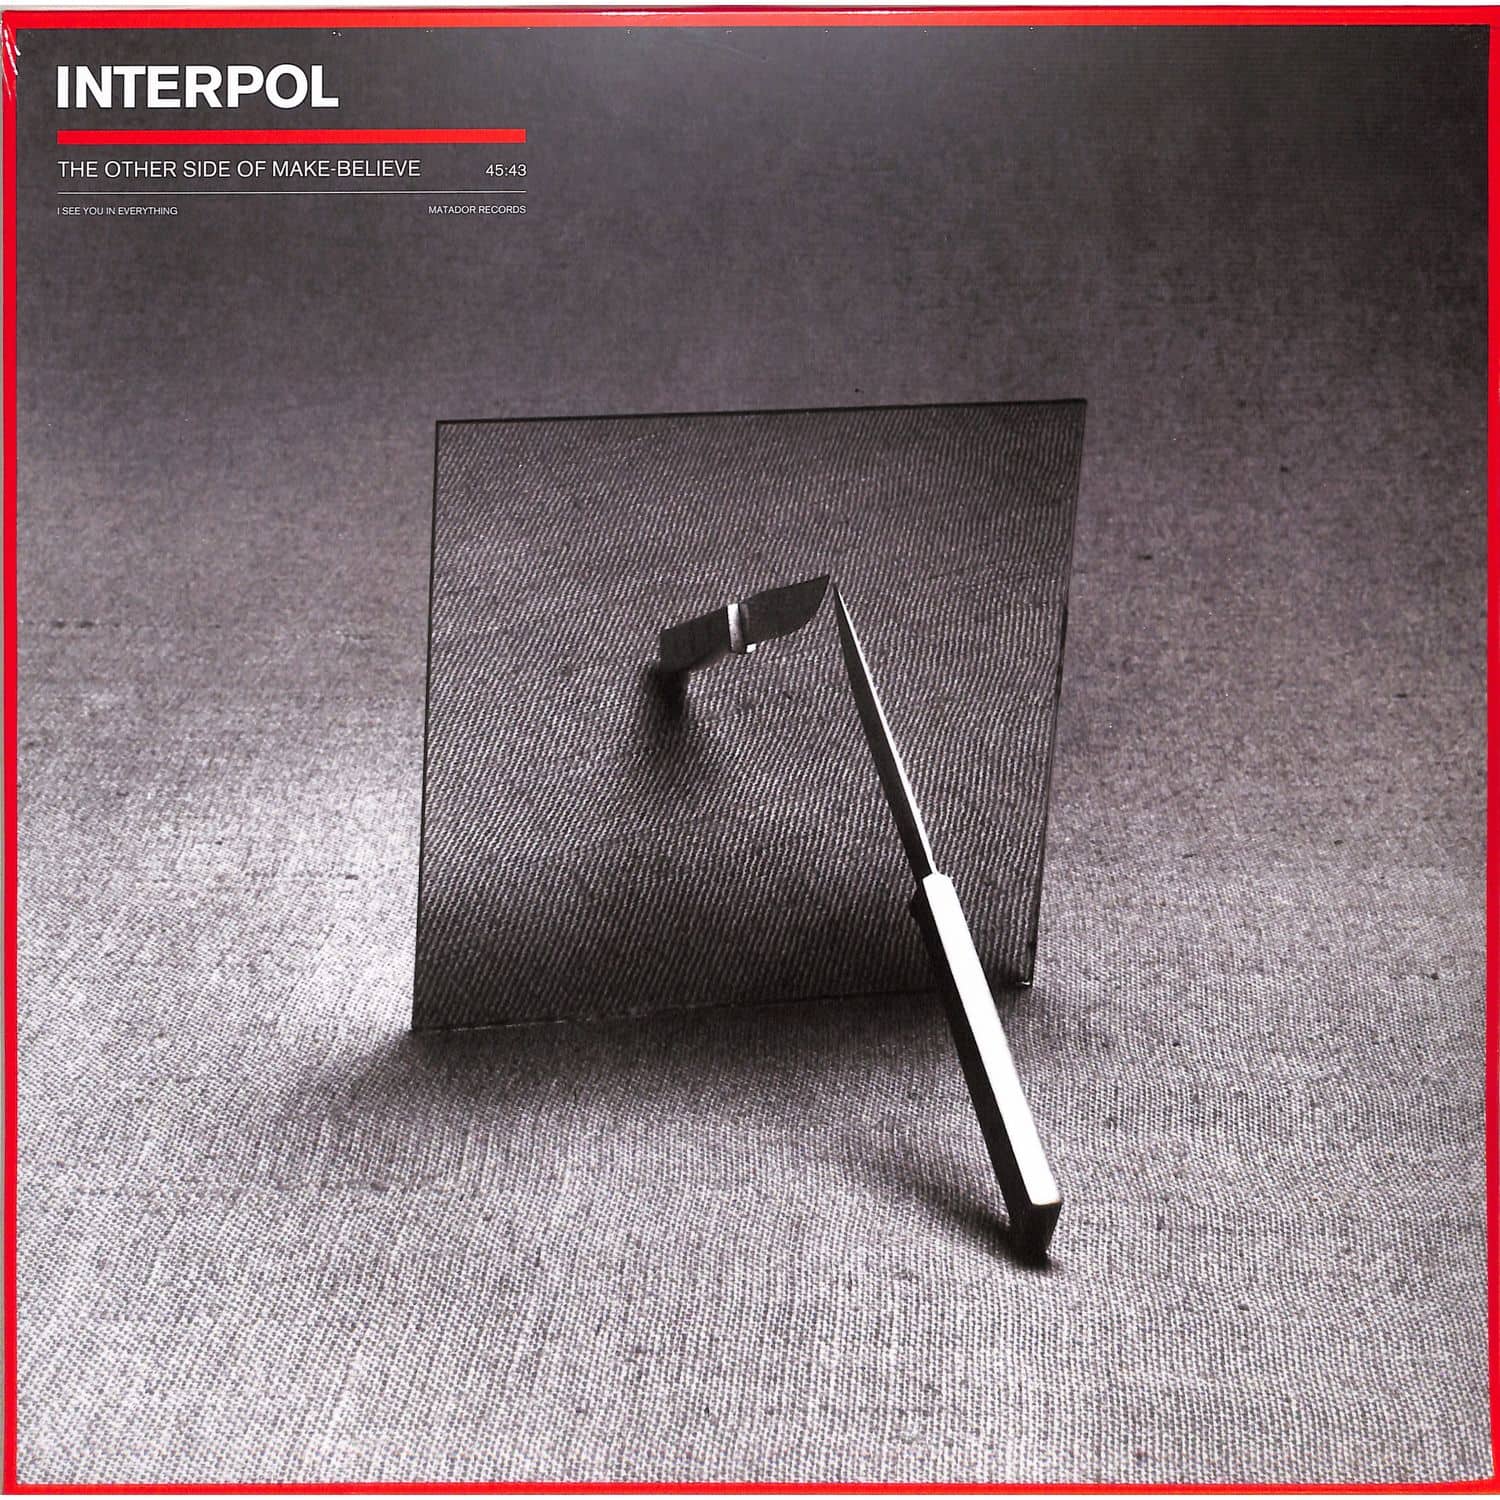 Interpol - THE OTHER SIDE OF MAKE BELIEVE 